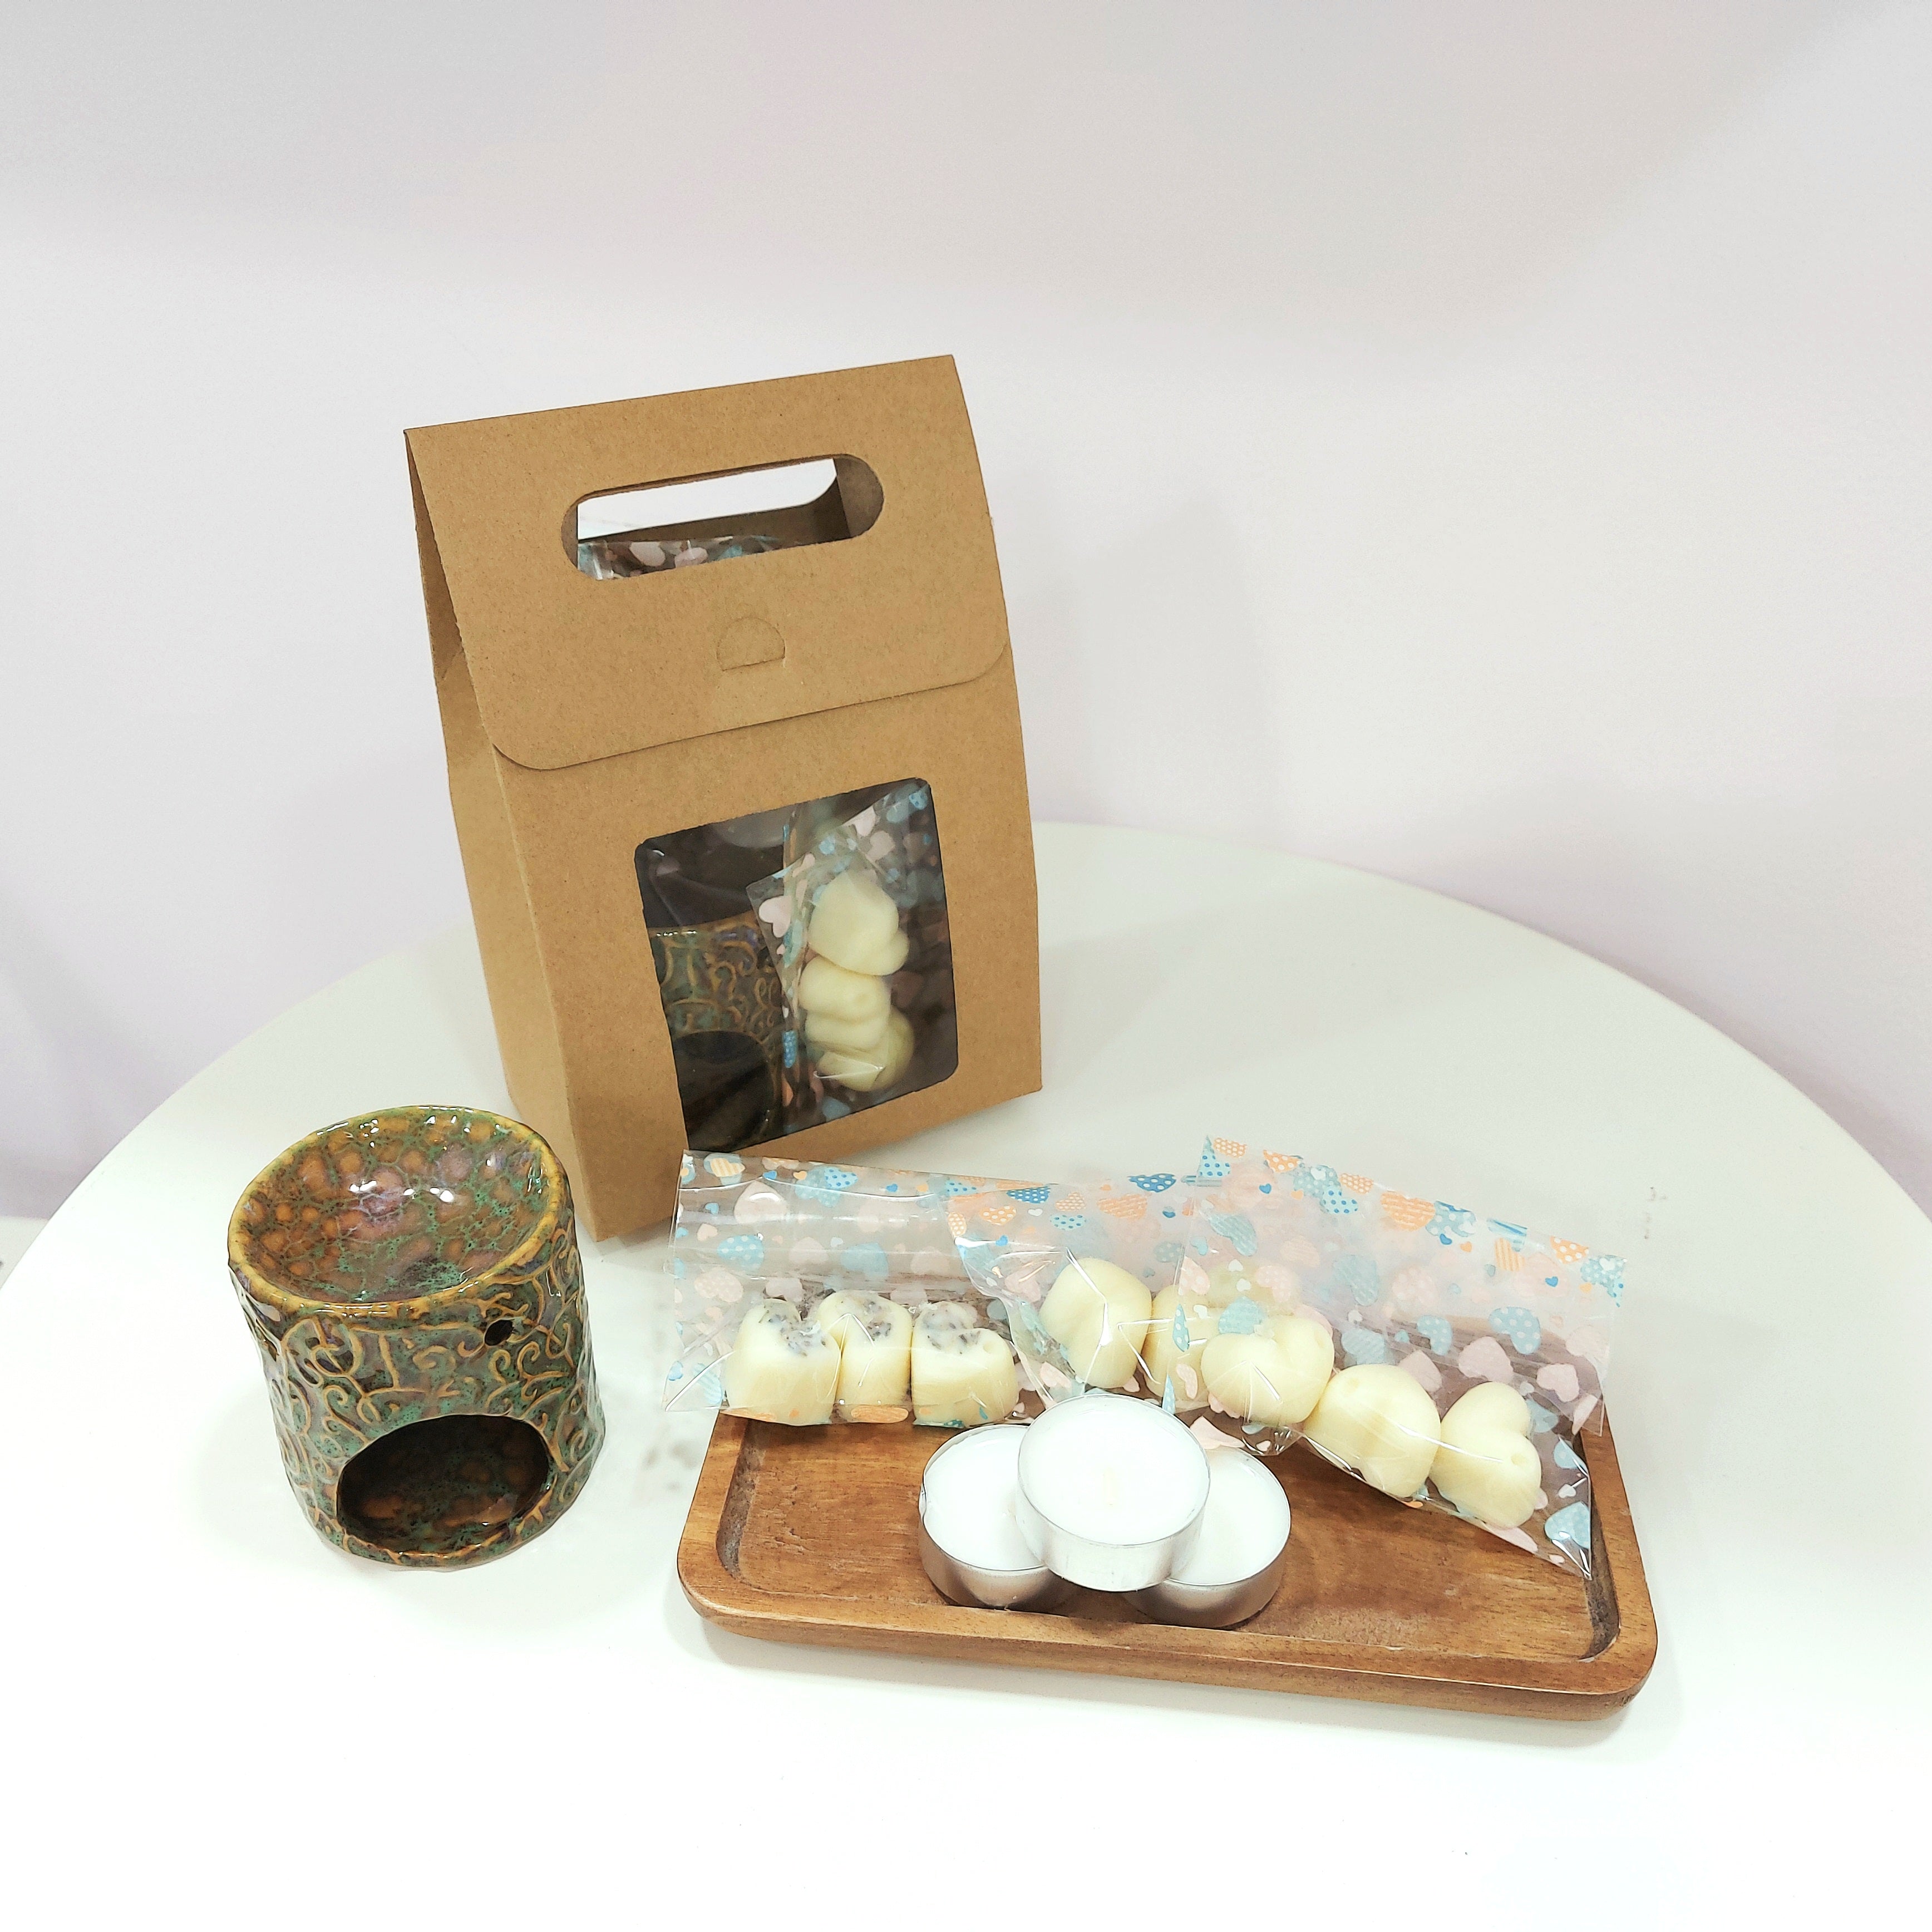 Melts my Heart gift set. Essential oil burner, 9 pieces of natural soy wax and bee wax melts, 3 different scents, 3 tealight candles. Monarchess Natural Luxuries skin care products. Monarchess, Amman, Irbid, Jordan